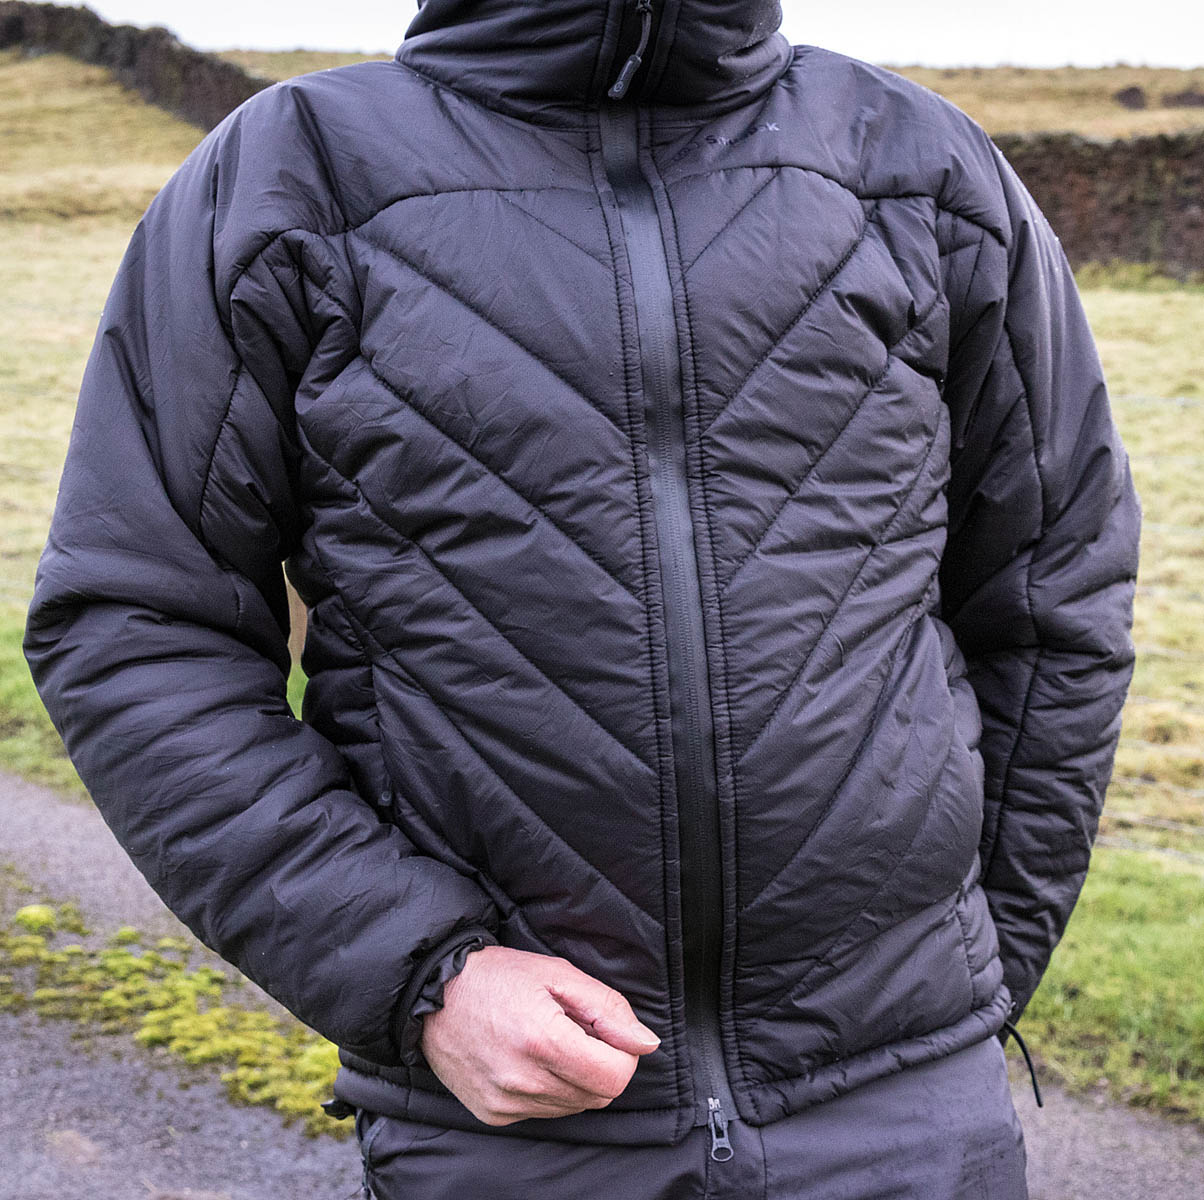 grough — On test: insulated jackets reviewed